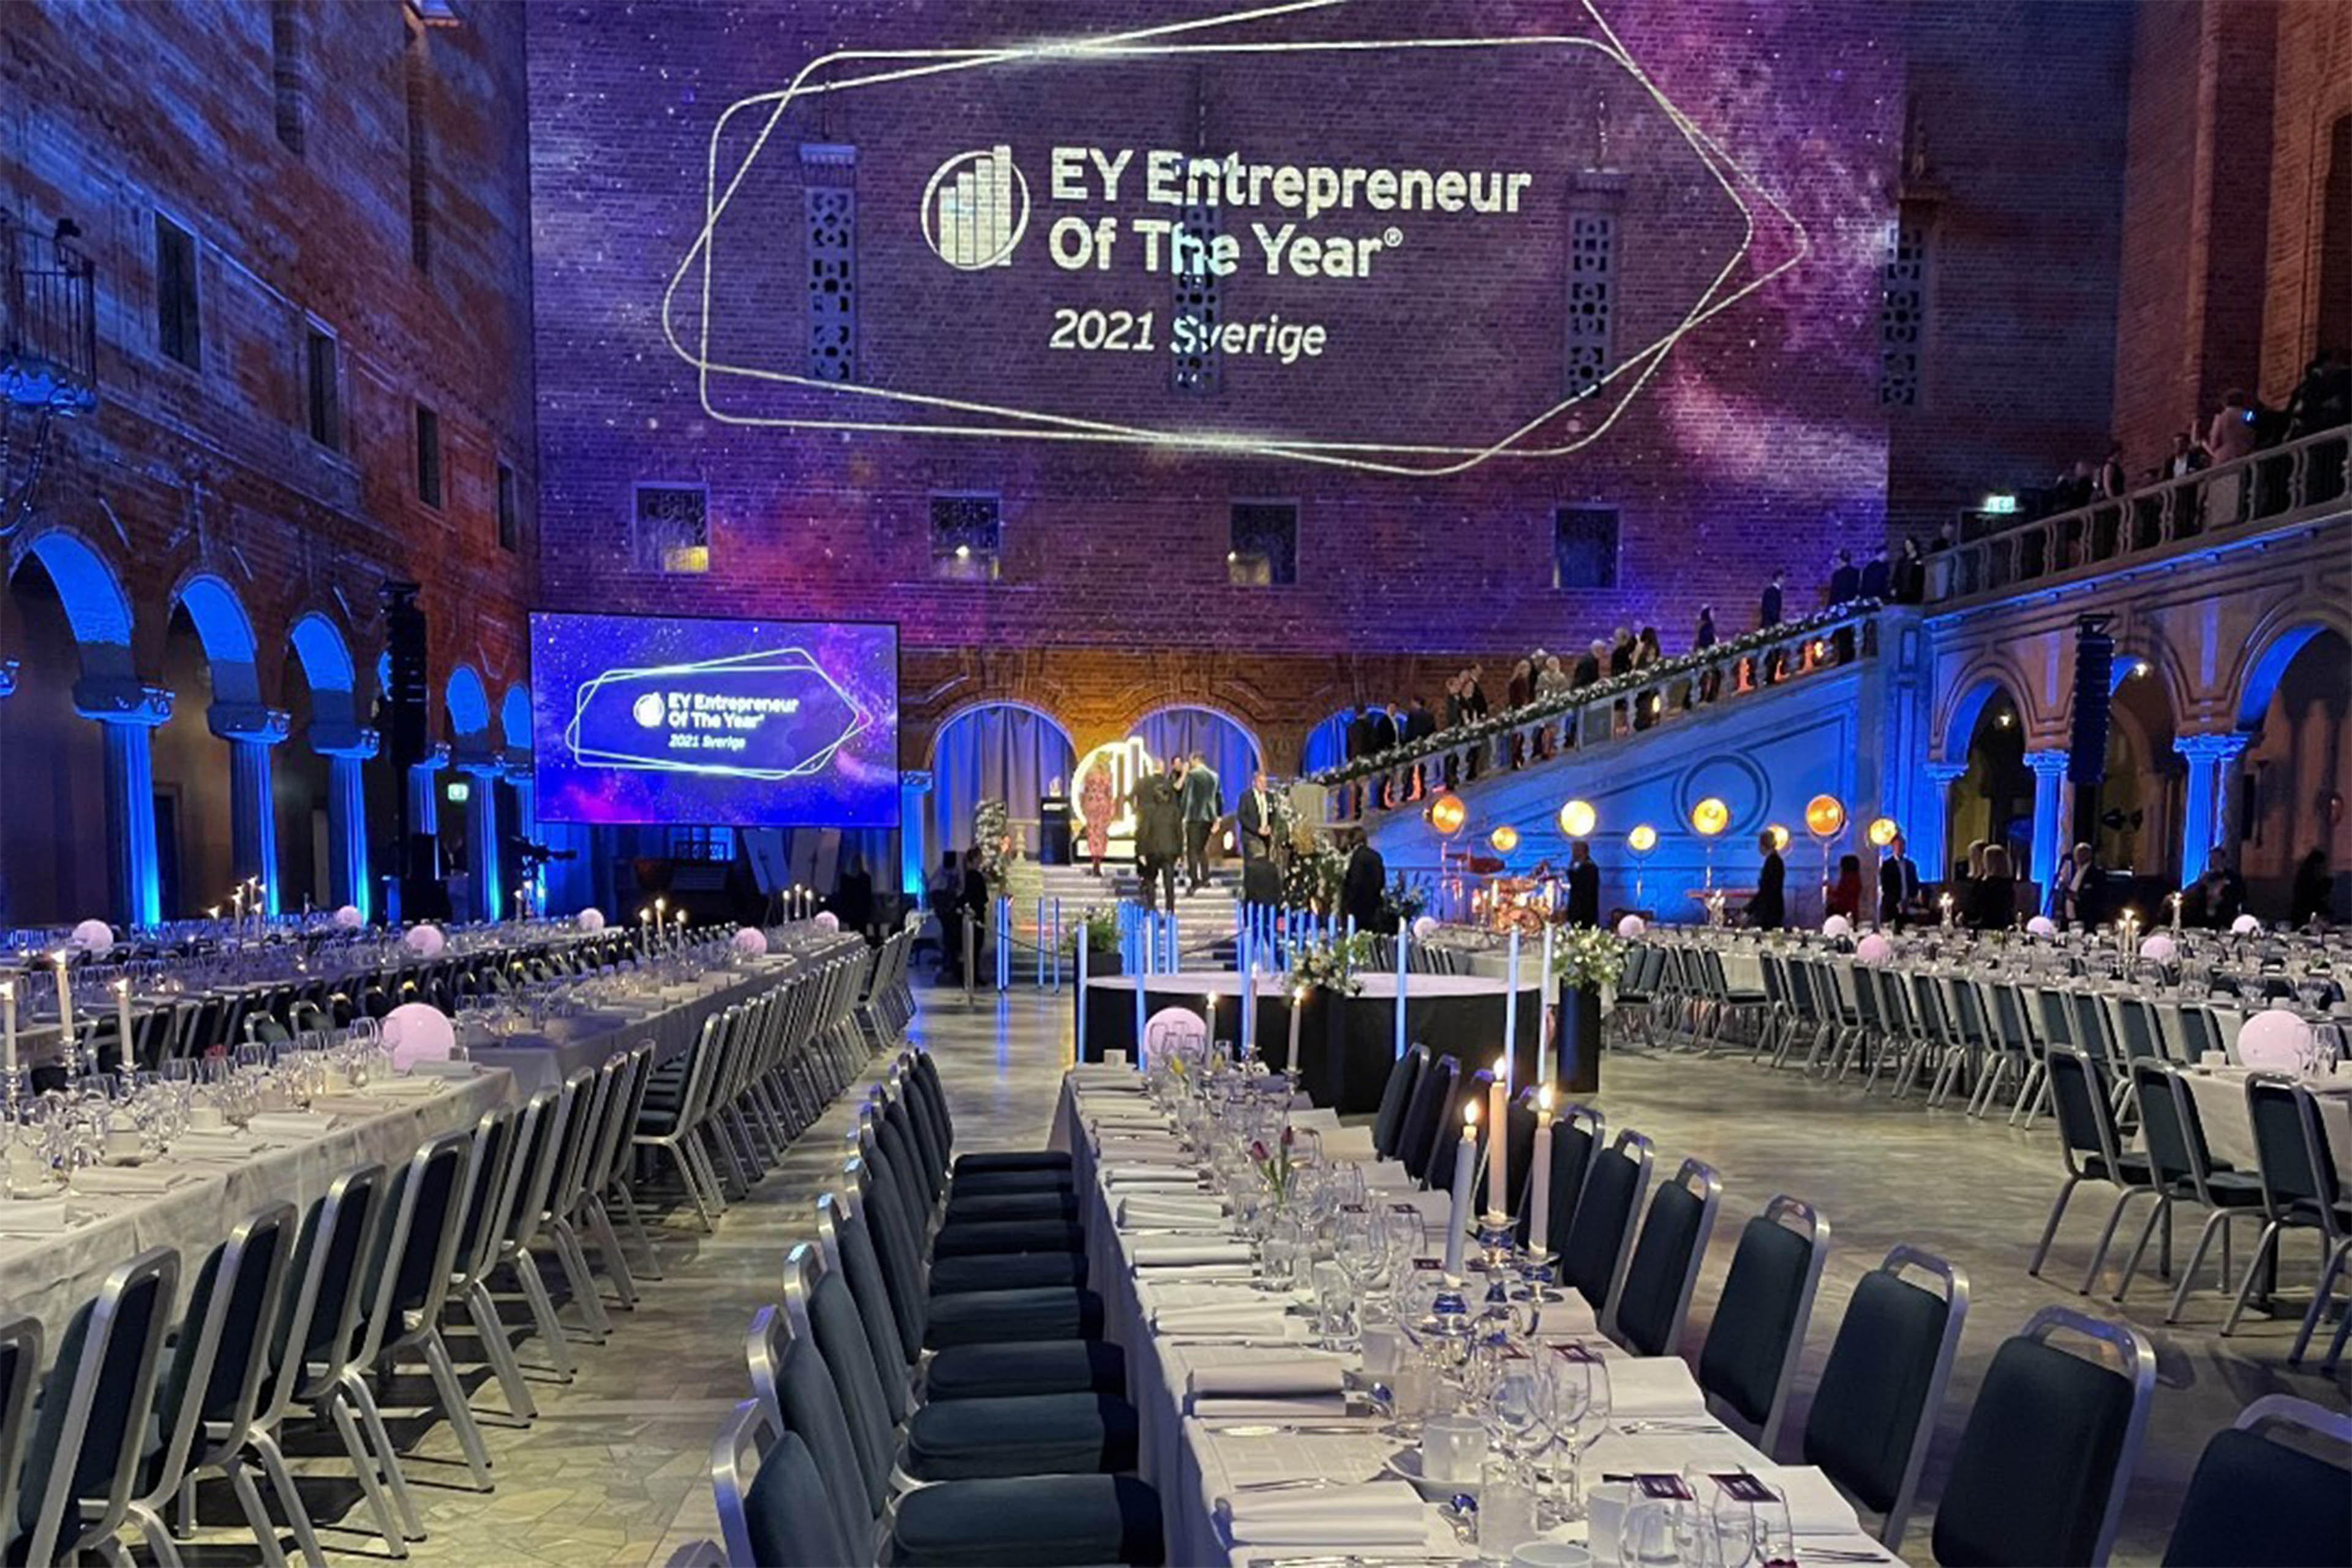 Gala dining hall of EY entrepreneur of the year